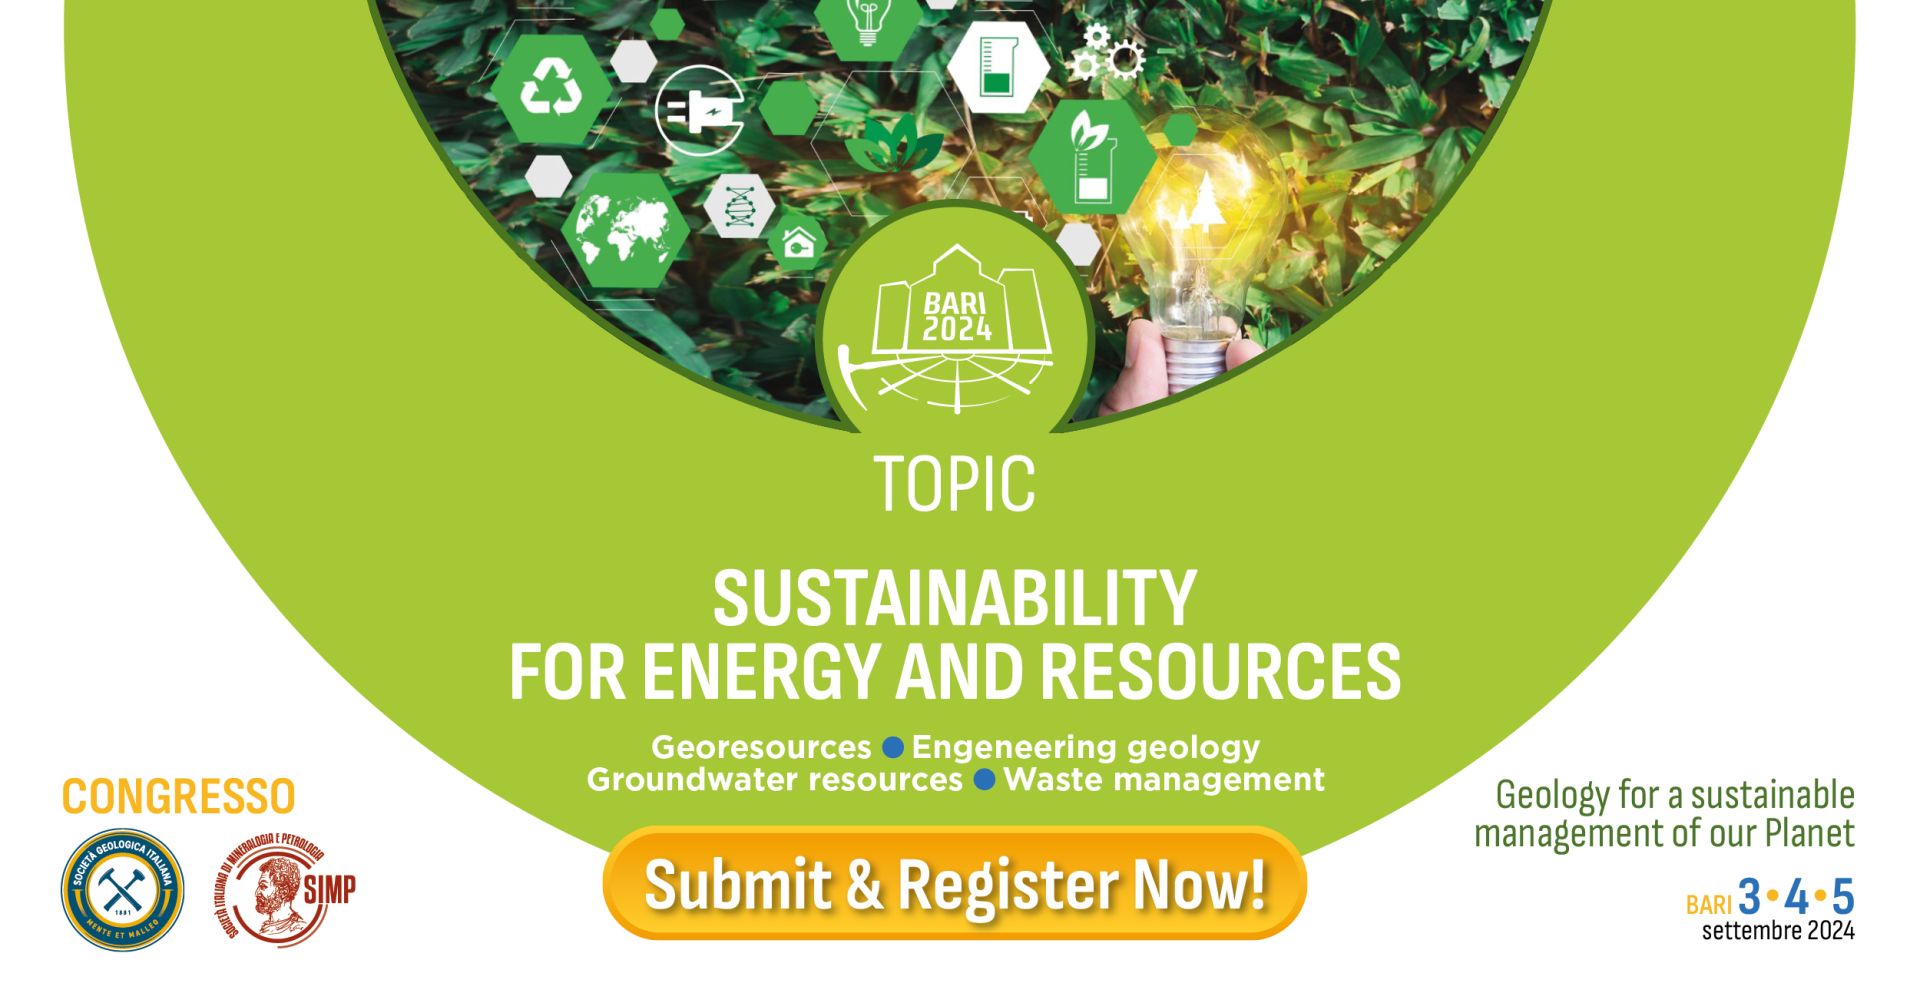 Sustainability for energy and resources